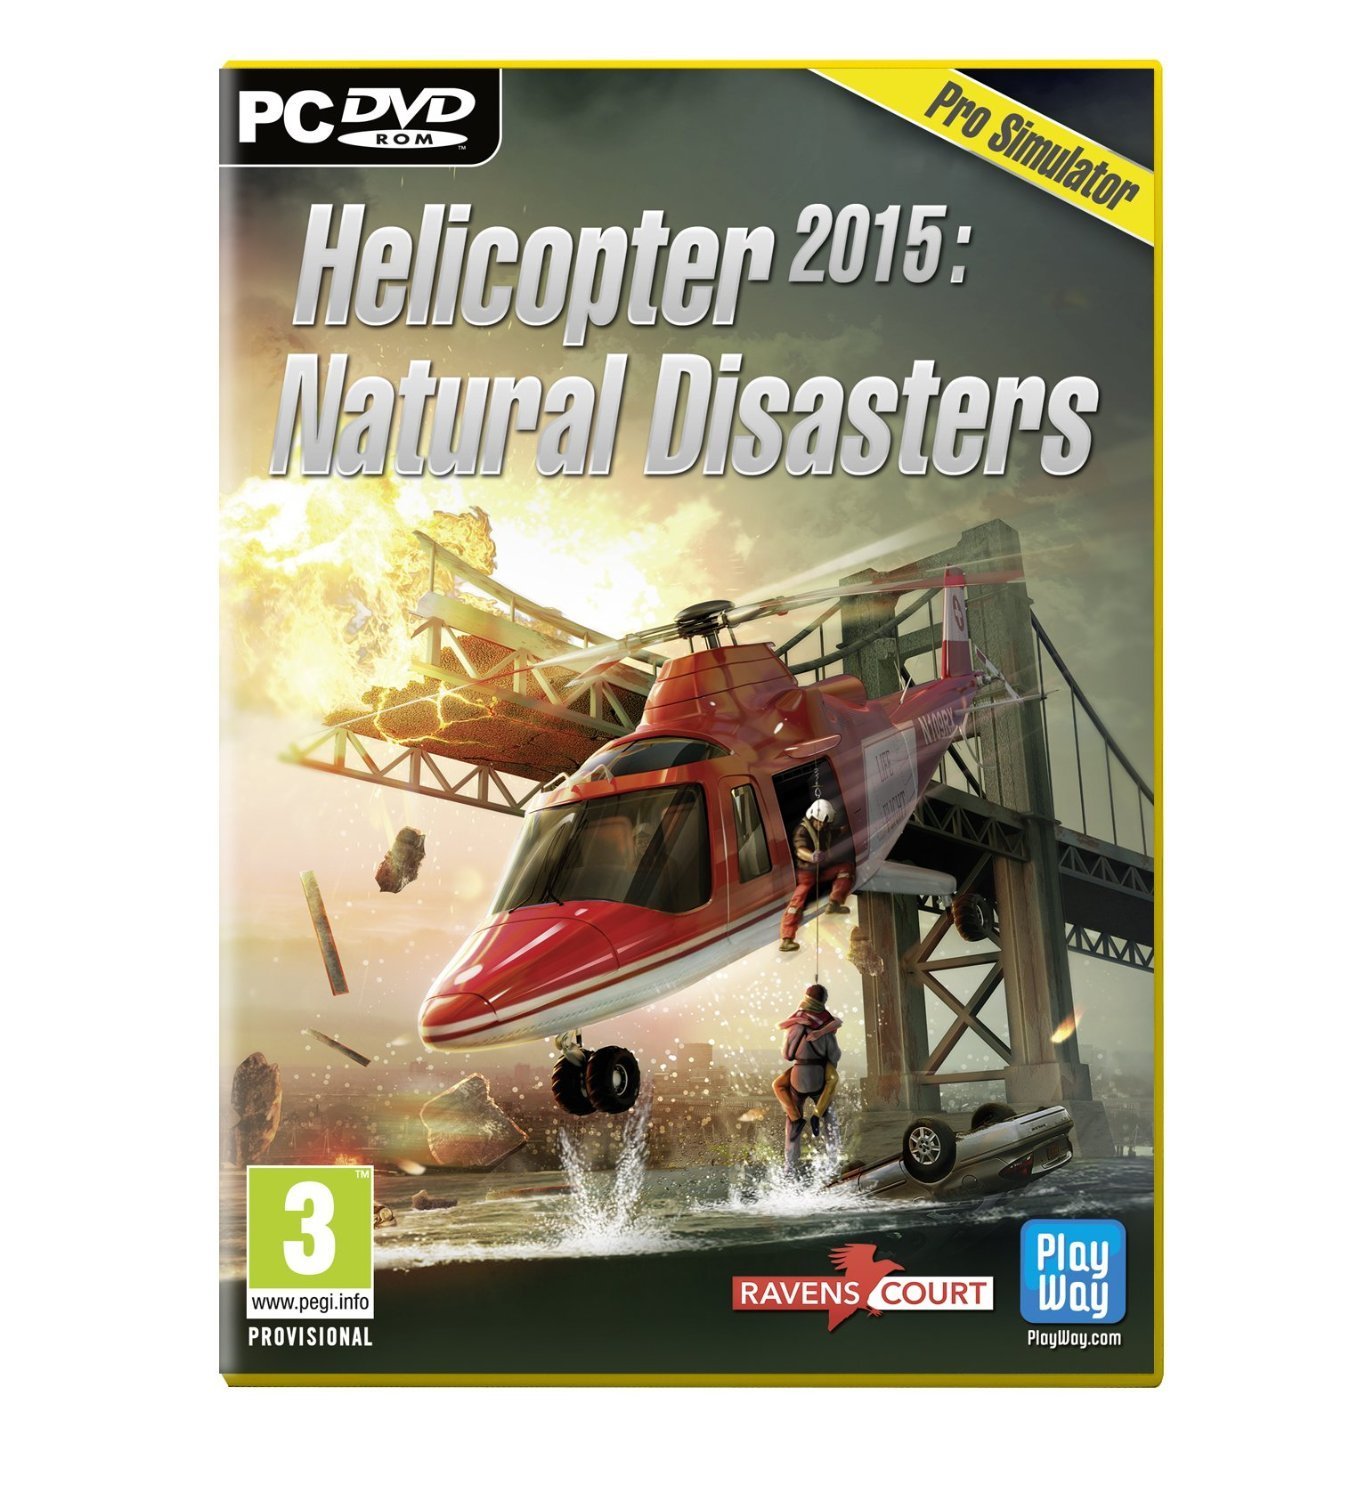 Osta Helicopter 2015: Natural Disasters